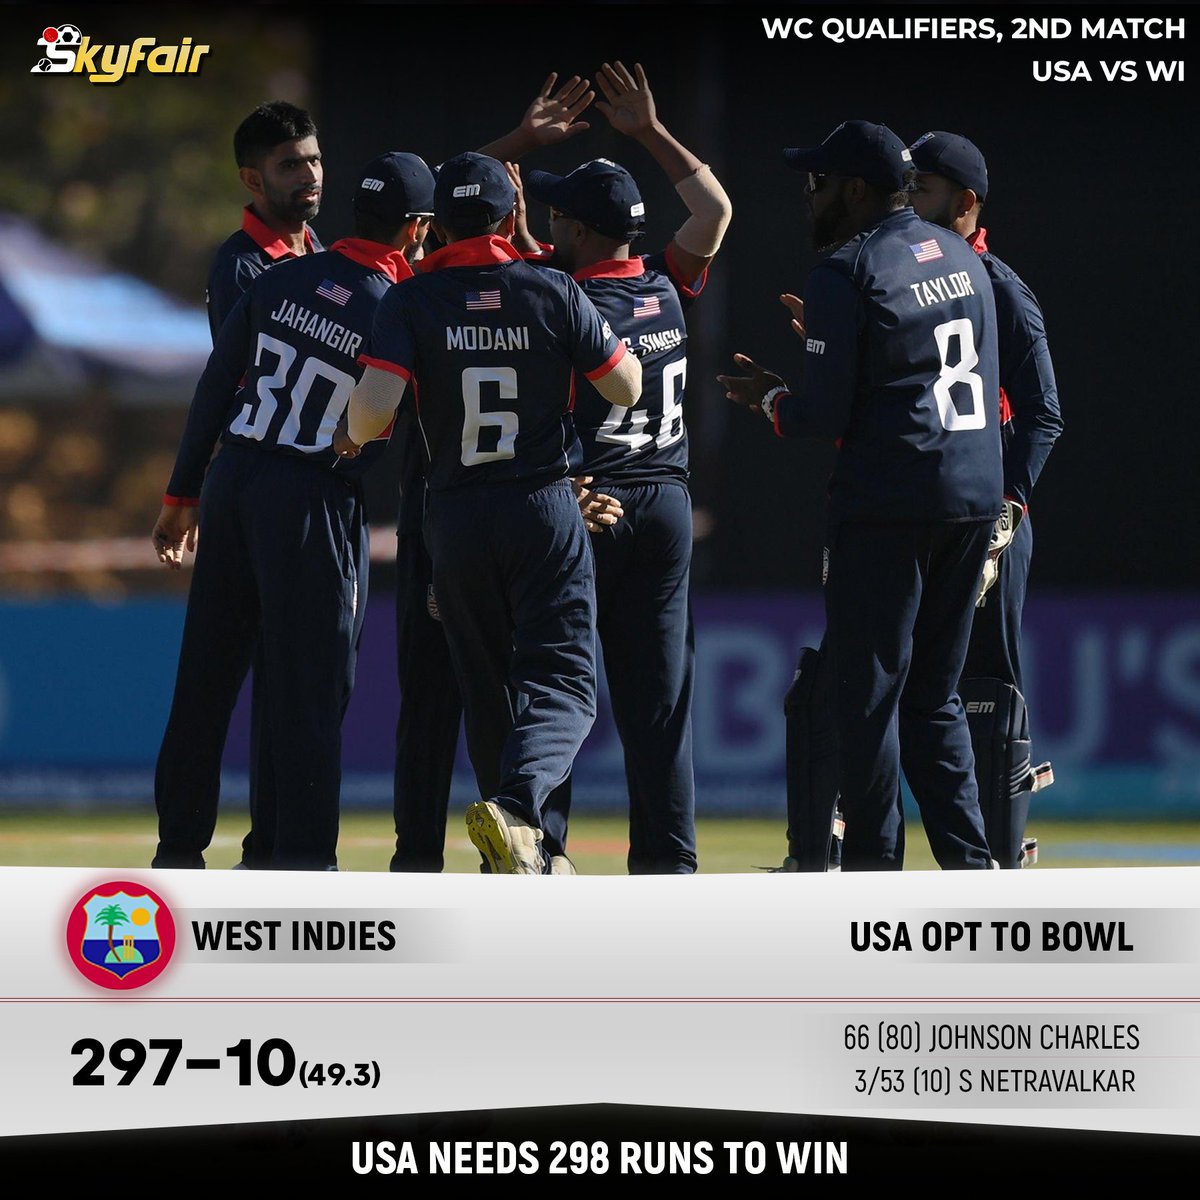 Nepal achieves their third highest total in ODIs, showcasing their batting prowess and determination. 
Meanwhile, West Indies put up a formidable fight, setting a challenging target of 297 runs. Let the chase begin!

#WIvsUSA #WestIndies #ZIMvsNEP #ODI #WorldCup #WCQualifiers